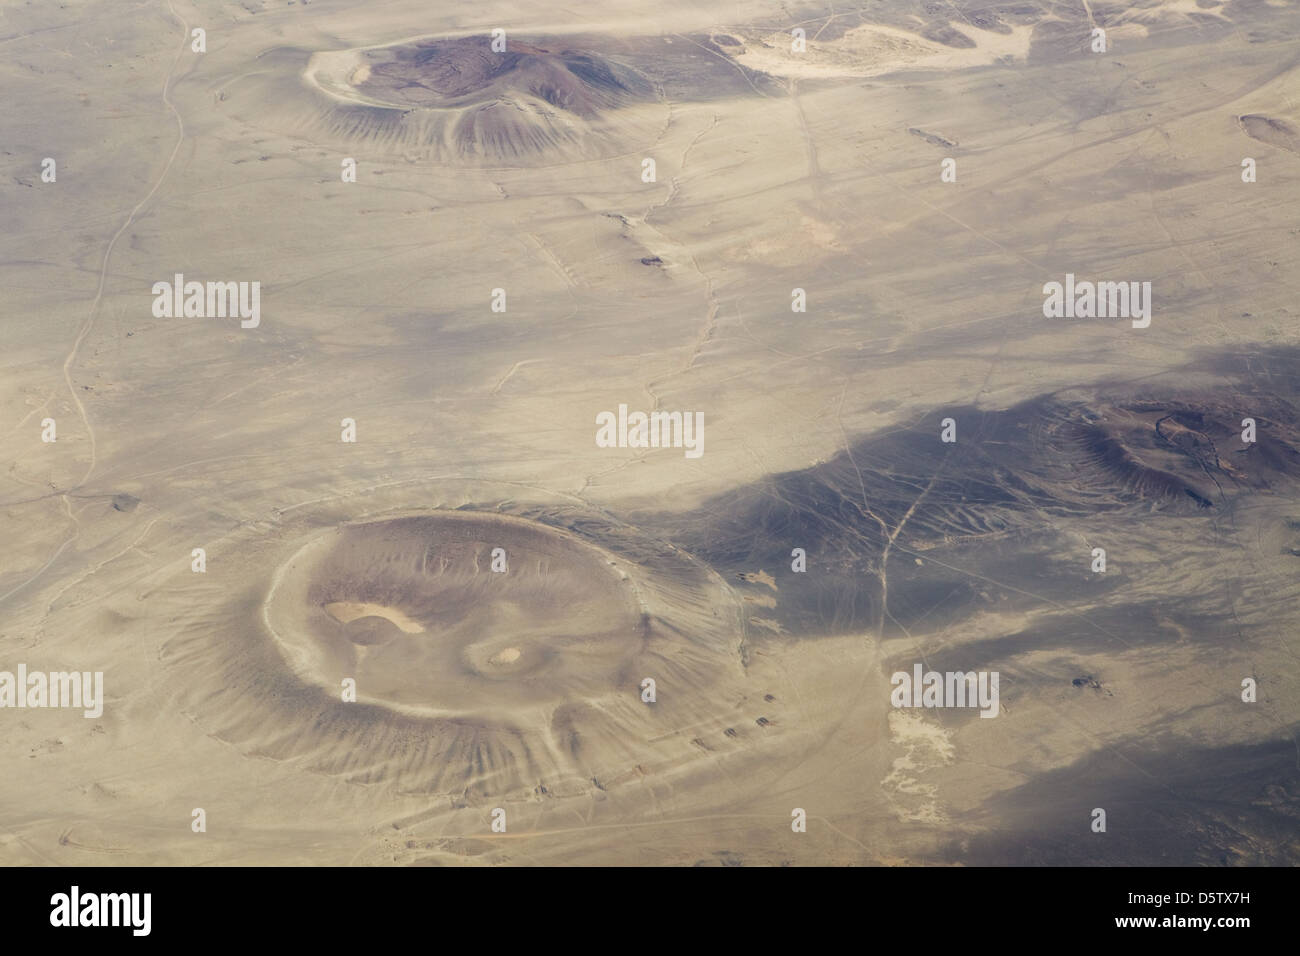 Aerial view of 2 craters Stock Photo